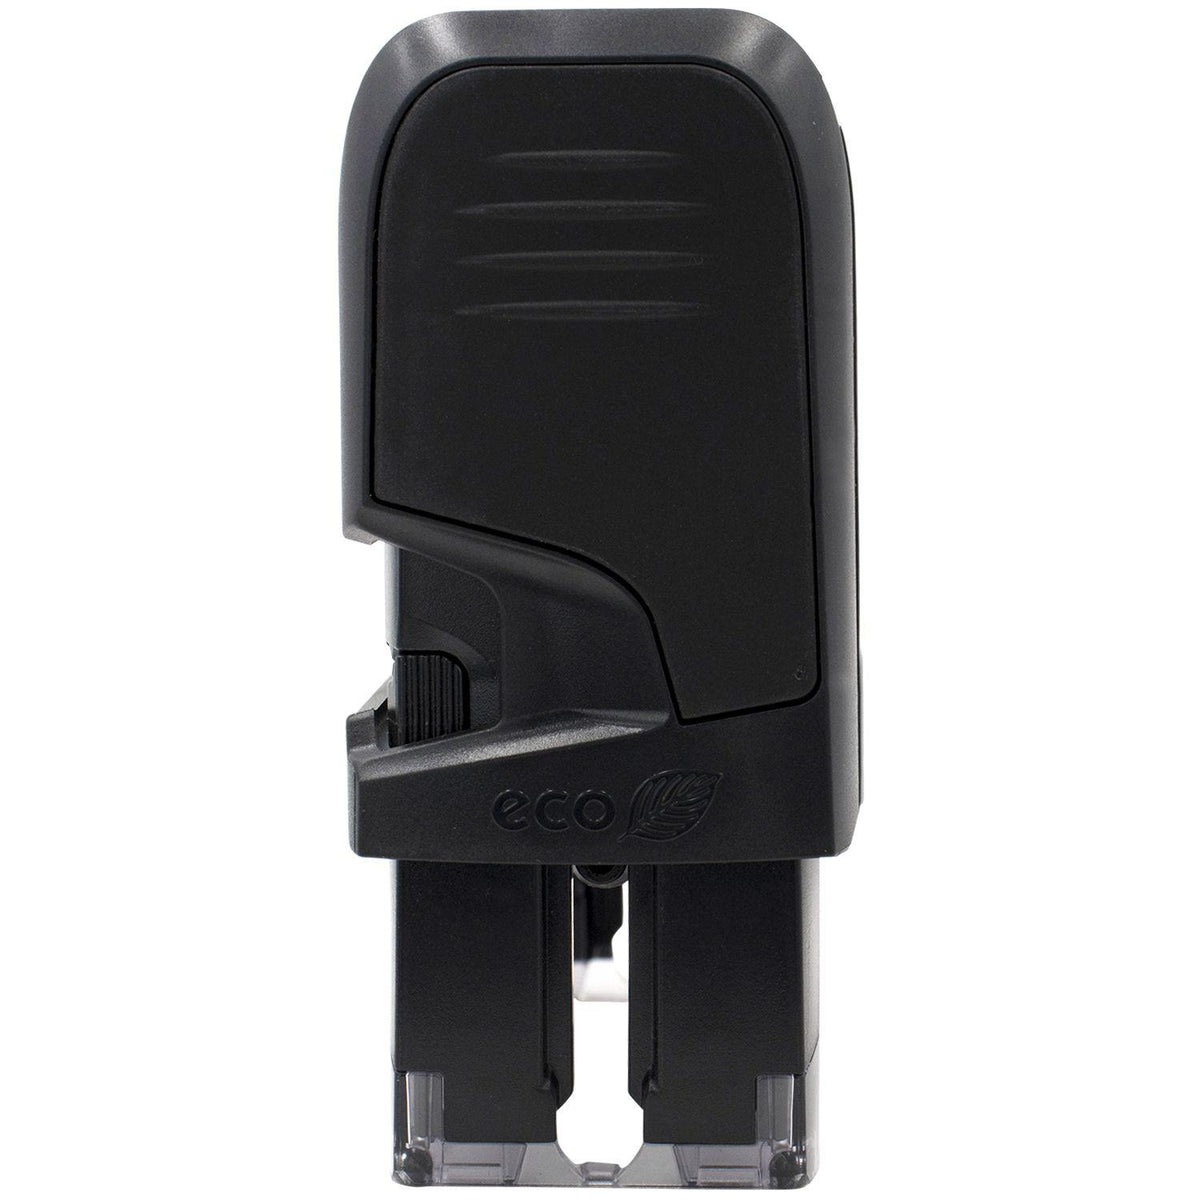 Large Self-Inking Contact Tracing Stamp Side View